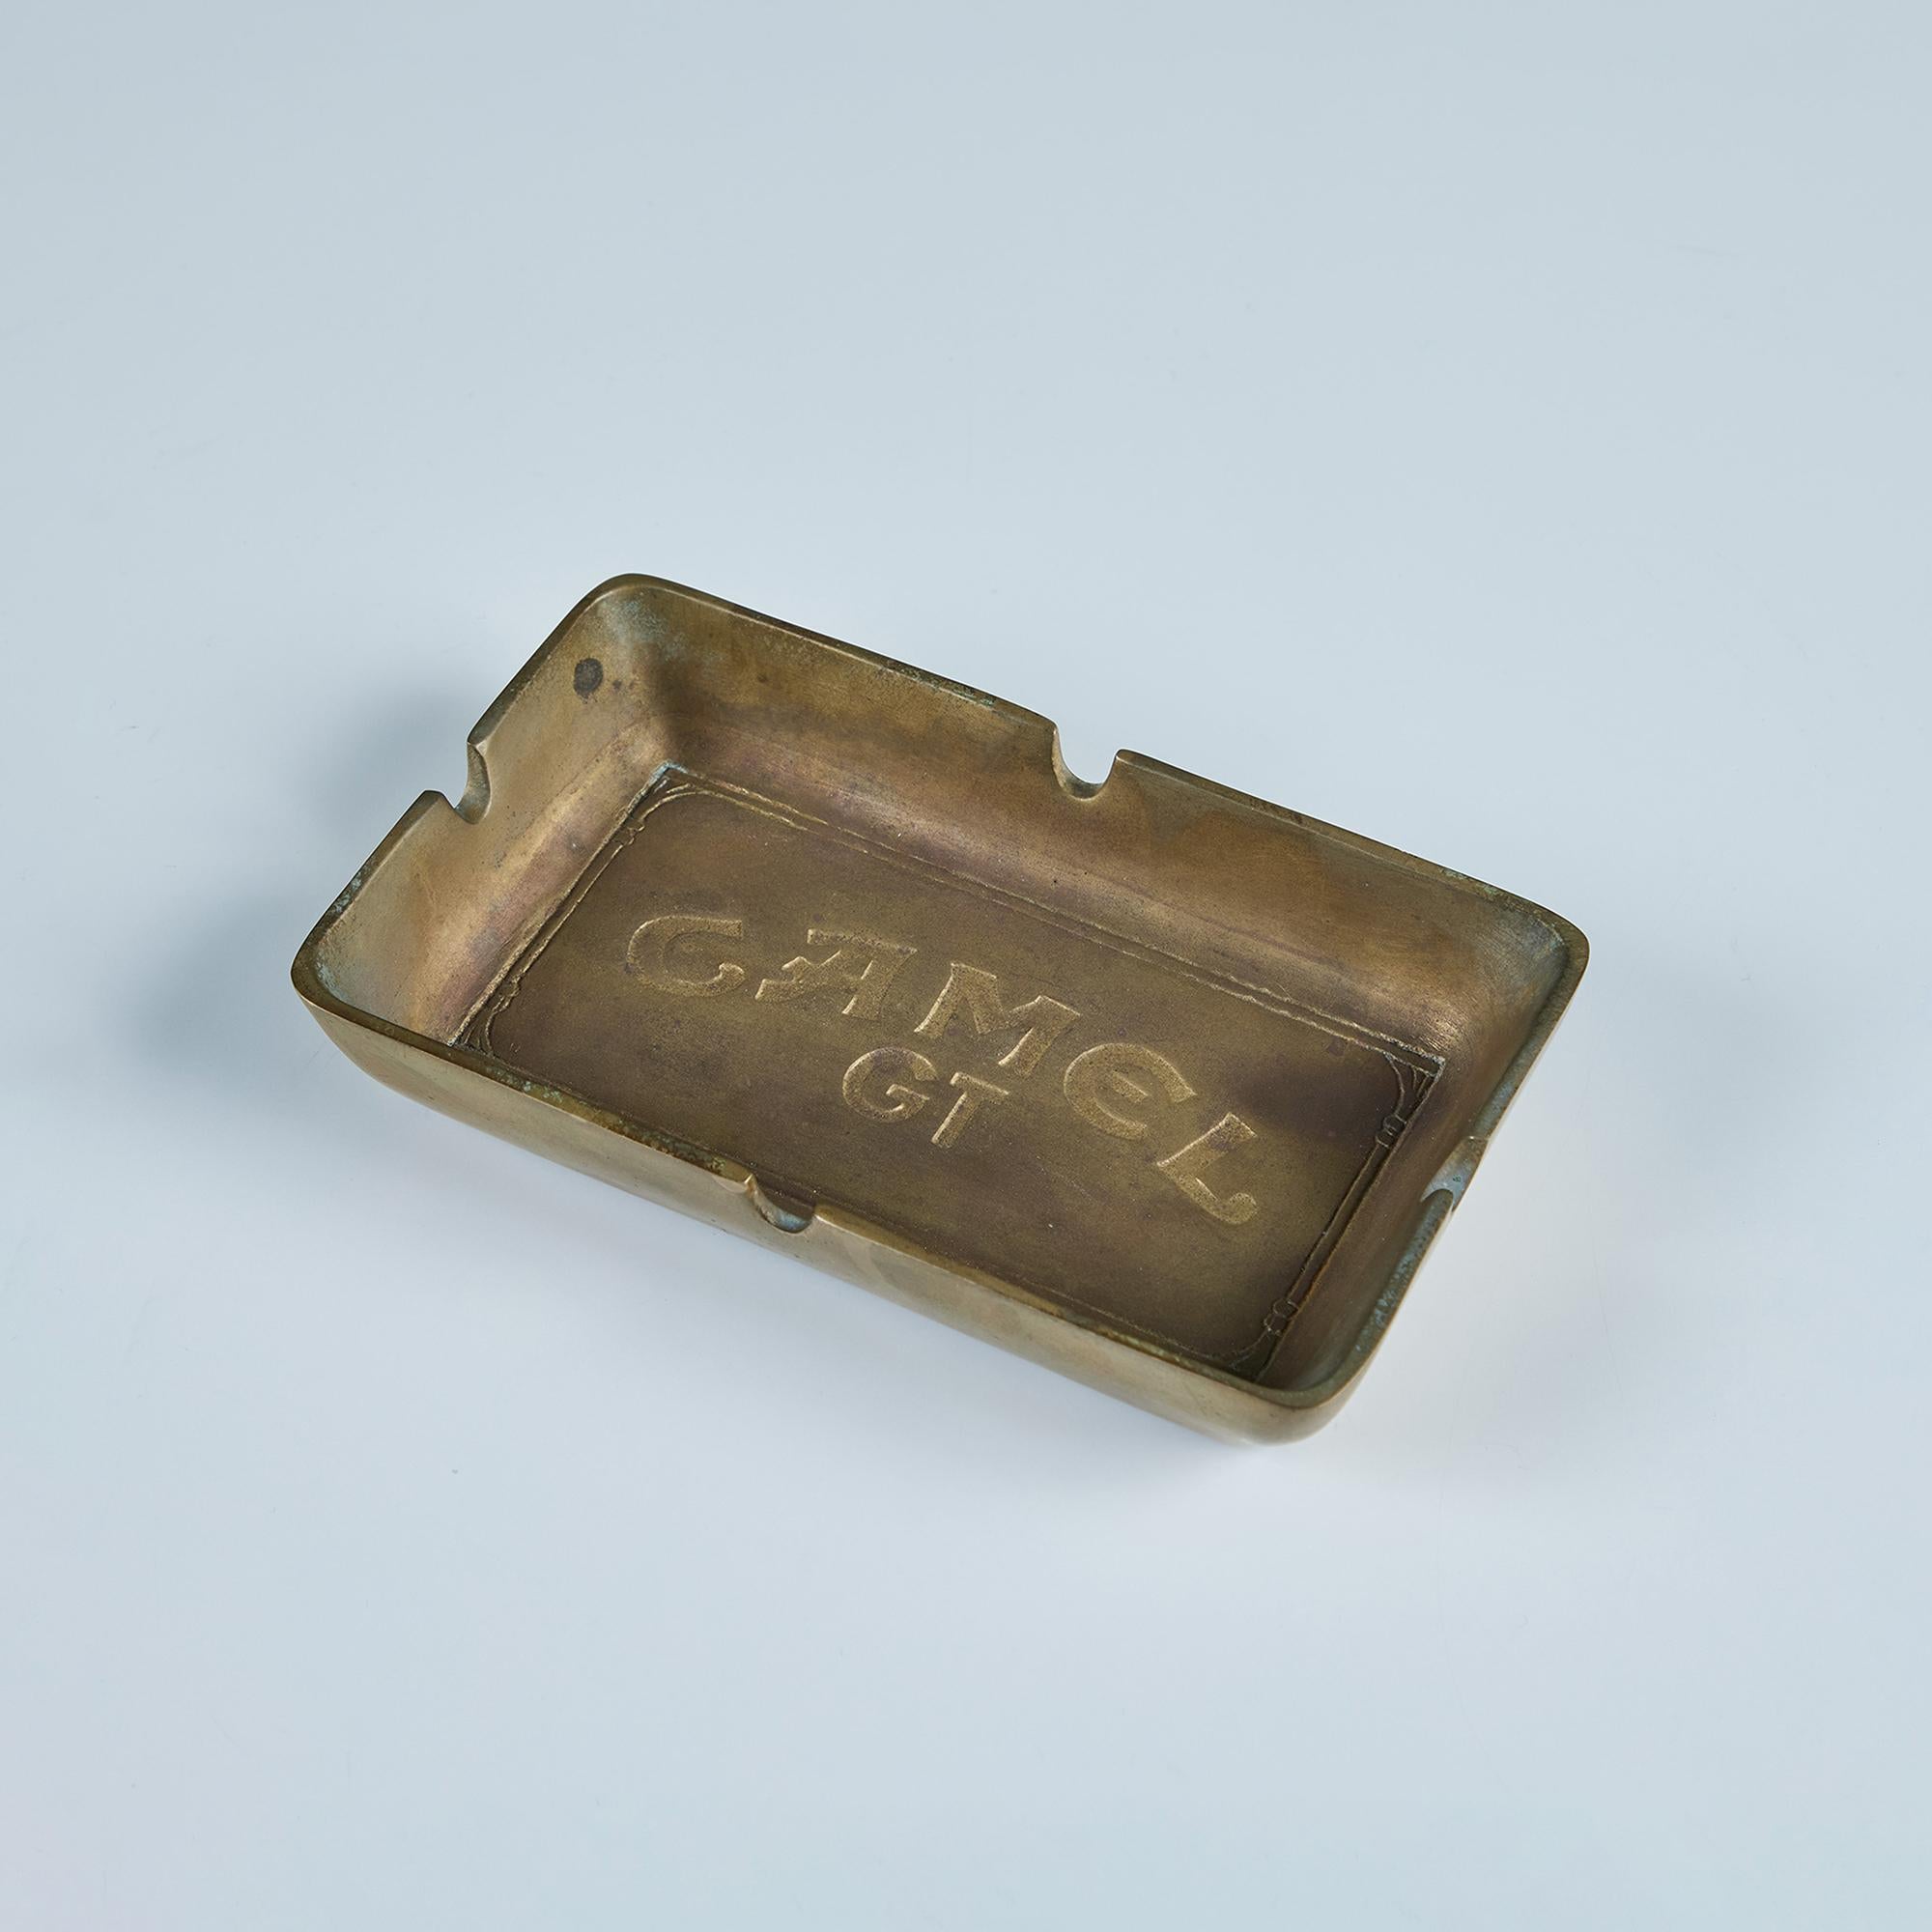 Cast brass ashtray c.1984 by R.J. Reynolds Tobacco Co. features the Camel Logo on the plate of the ashtray. The rectangular dish has high sides with a divot on each side for a cigarette or other smokable items. A playful accessory for a smoking